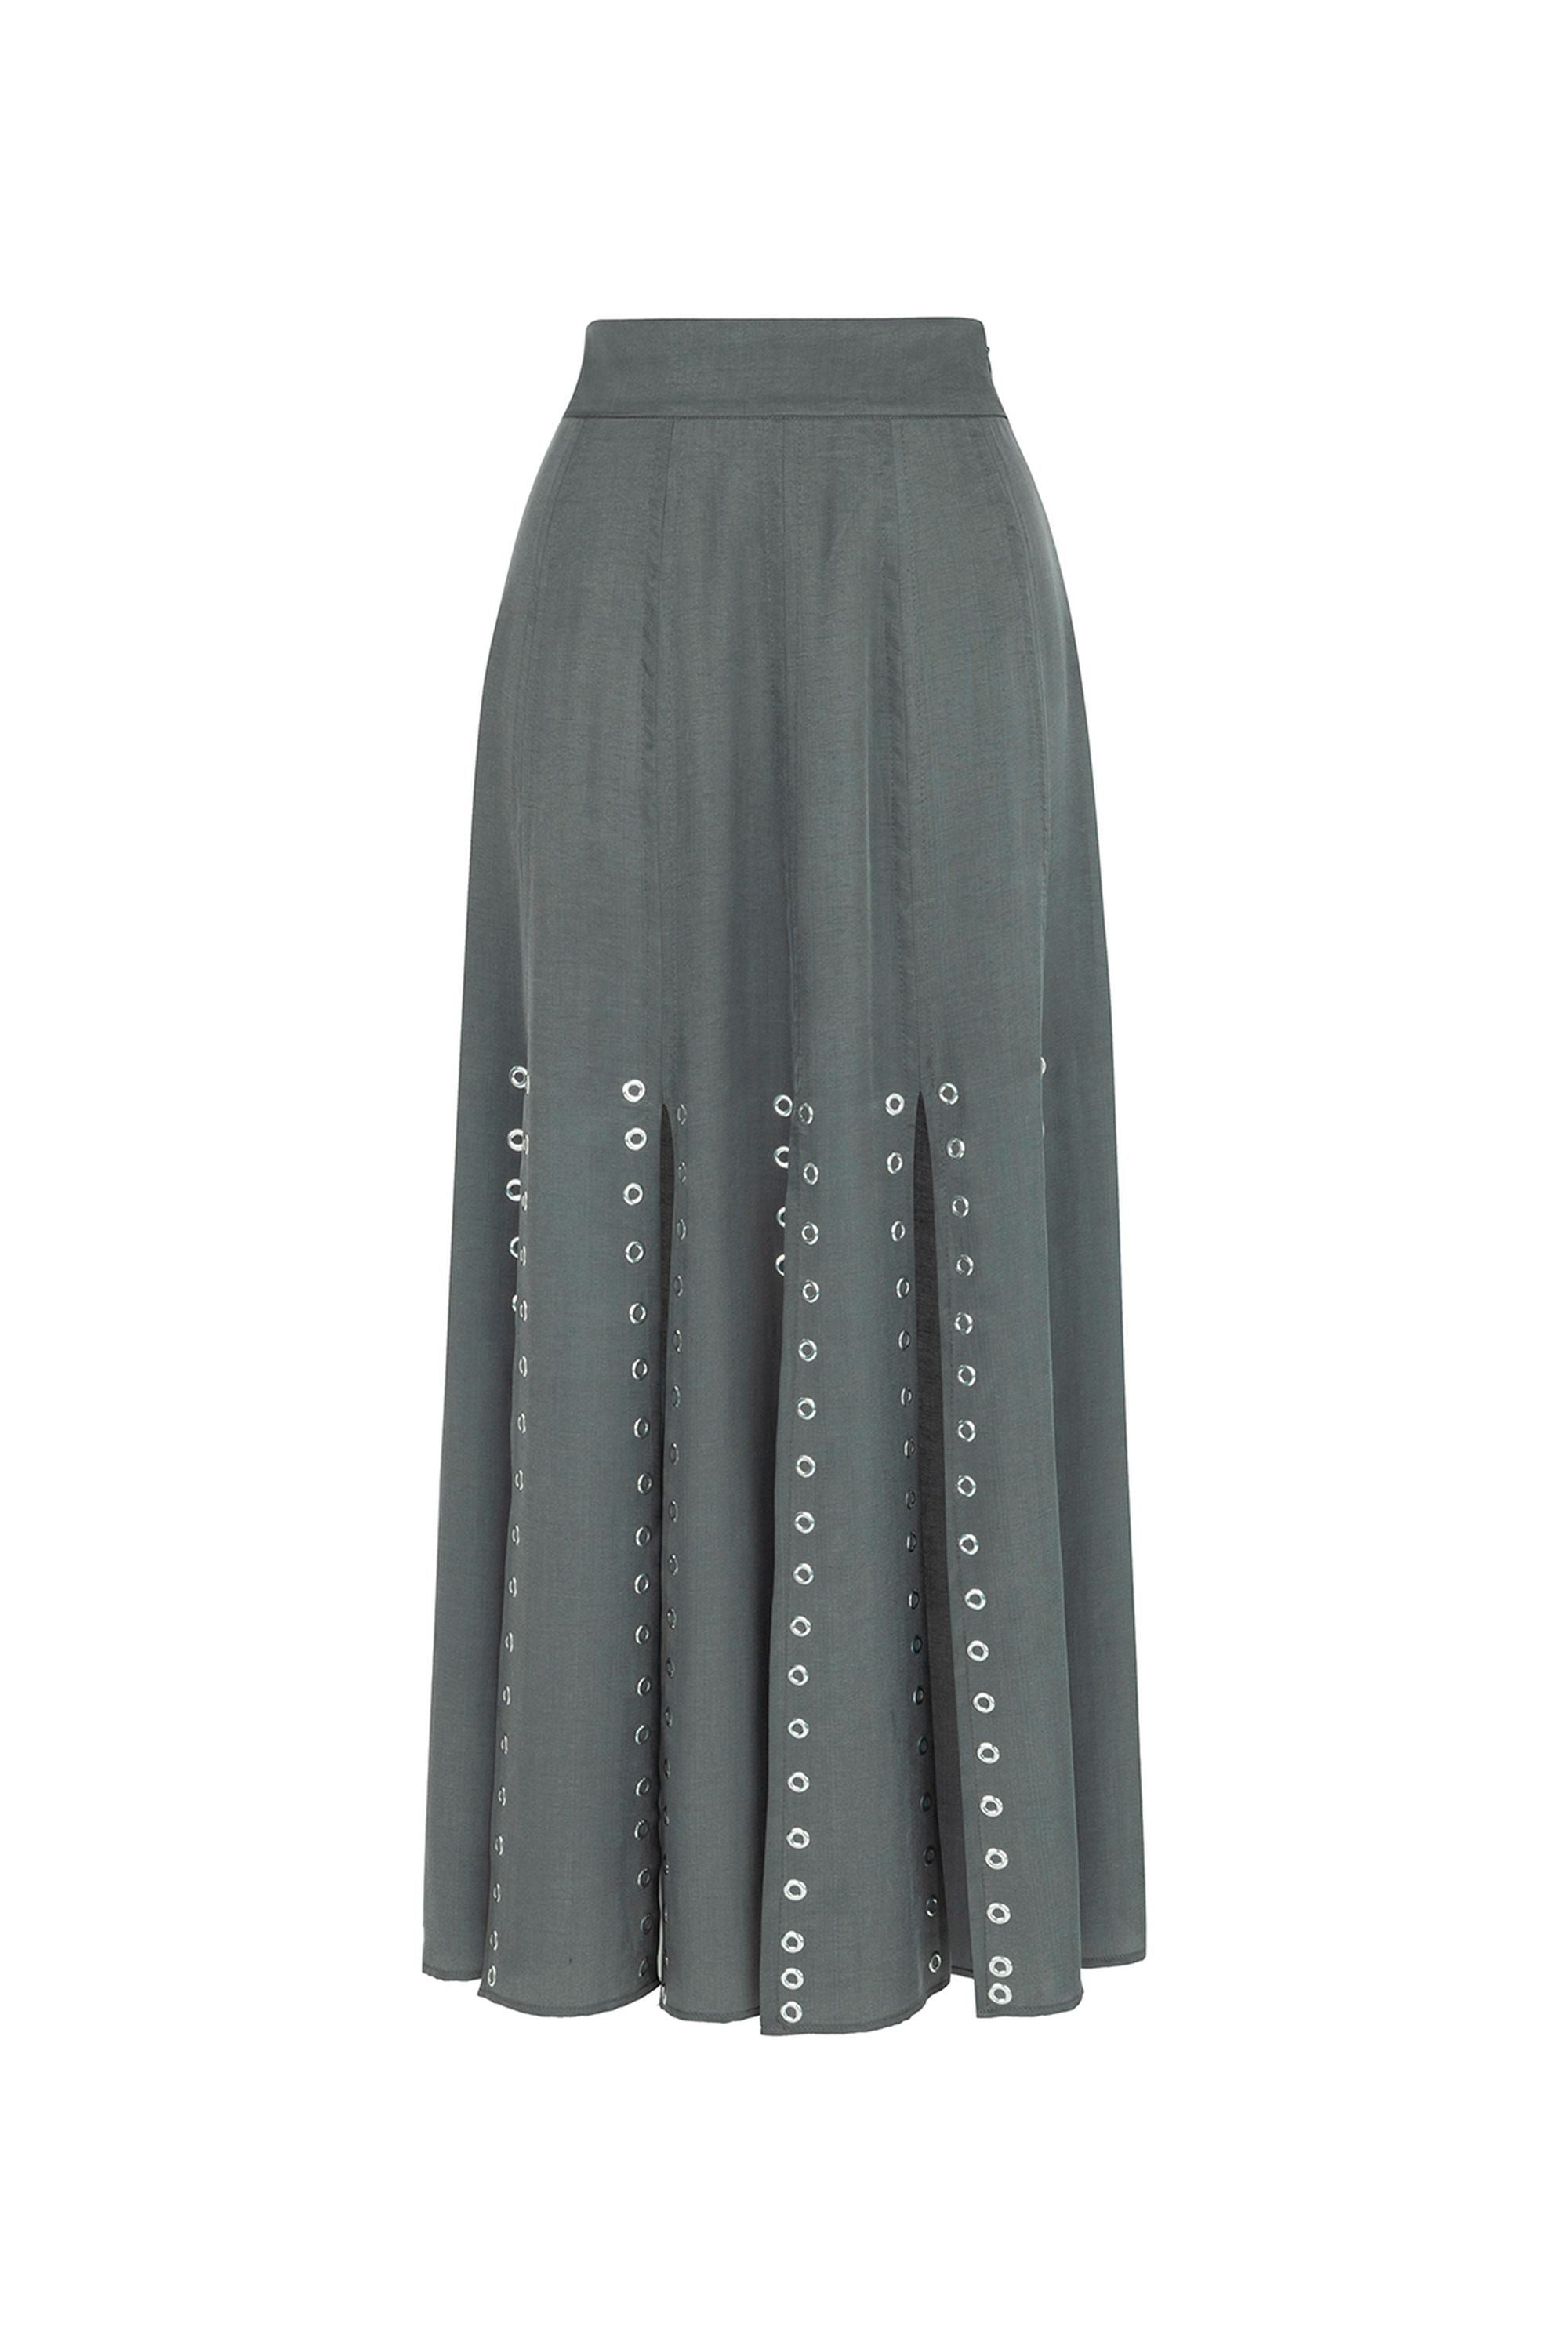 Nocturne Women's Grey Long Eyelet Skirt With Slits In Green